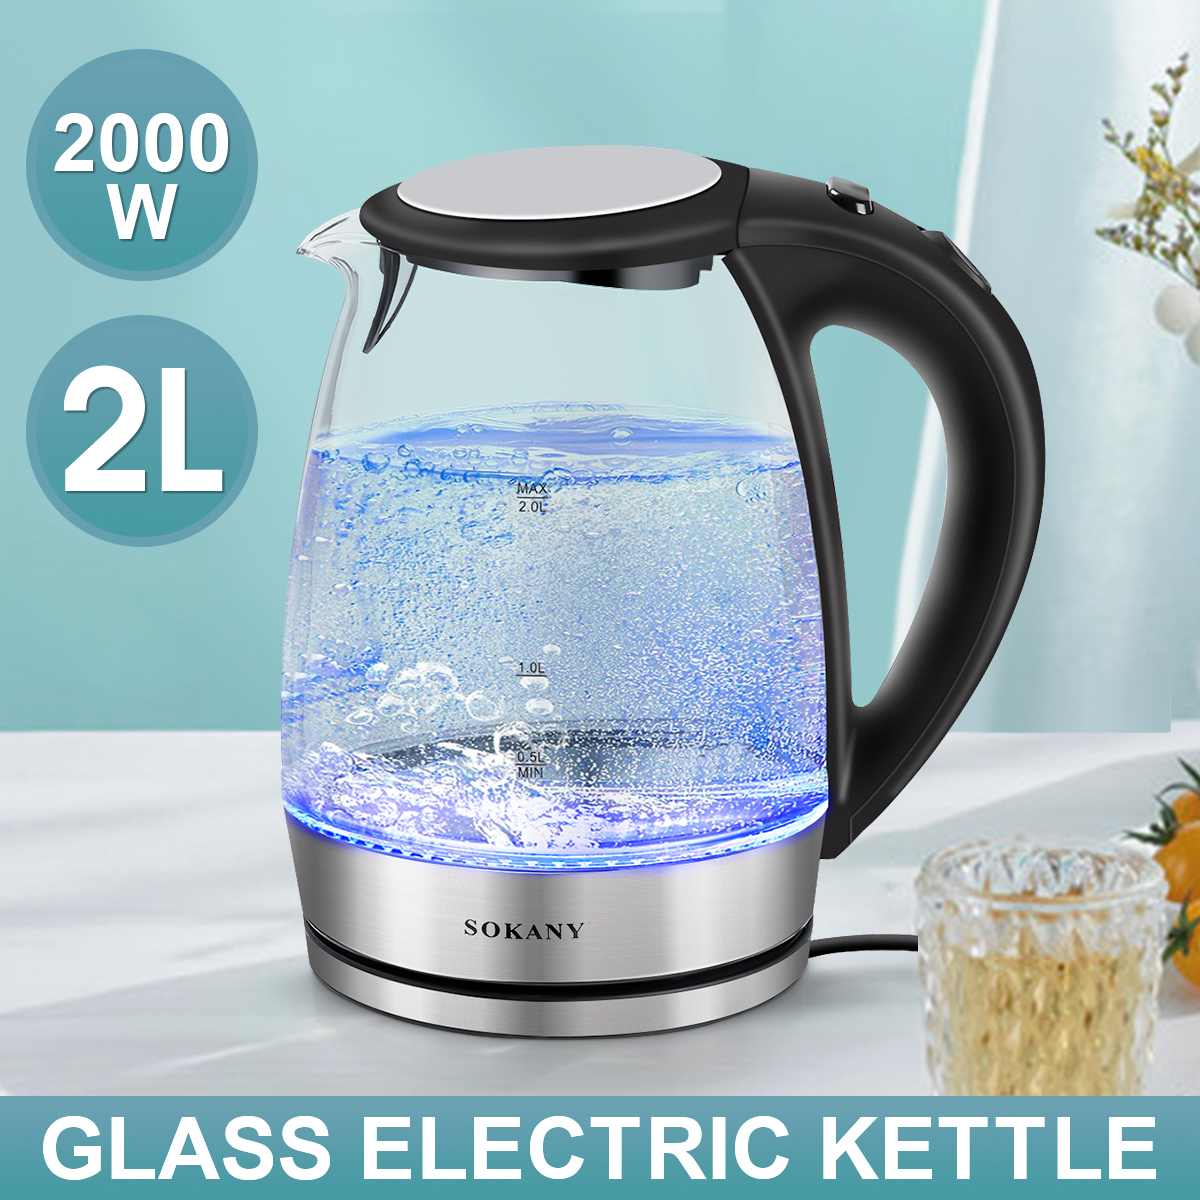  Glass Electric Kettle, 1.8 Liter Tea Kettle With Blue